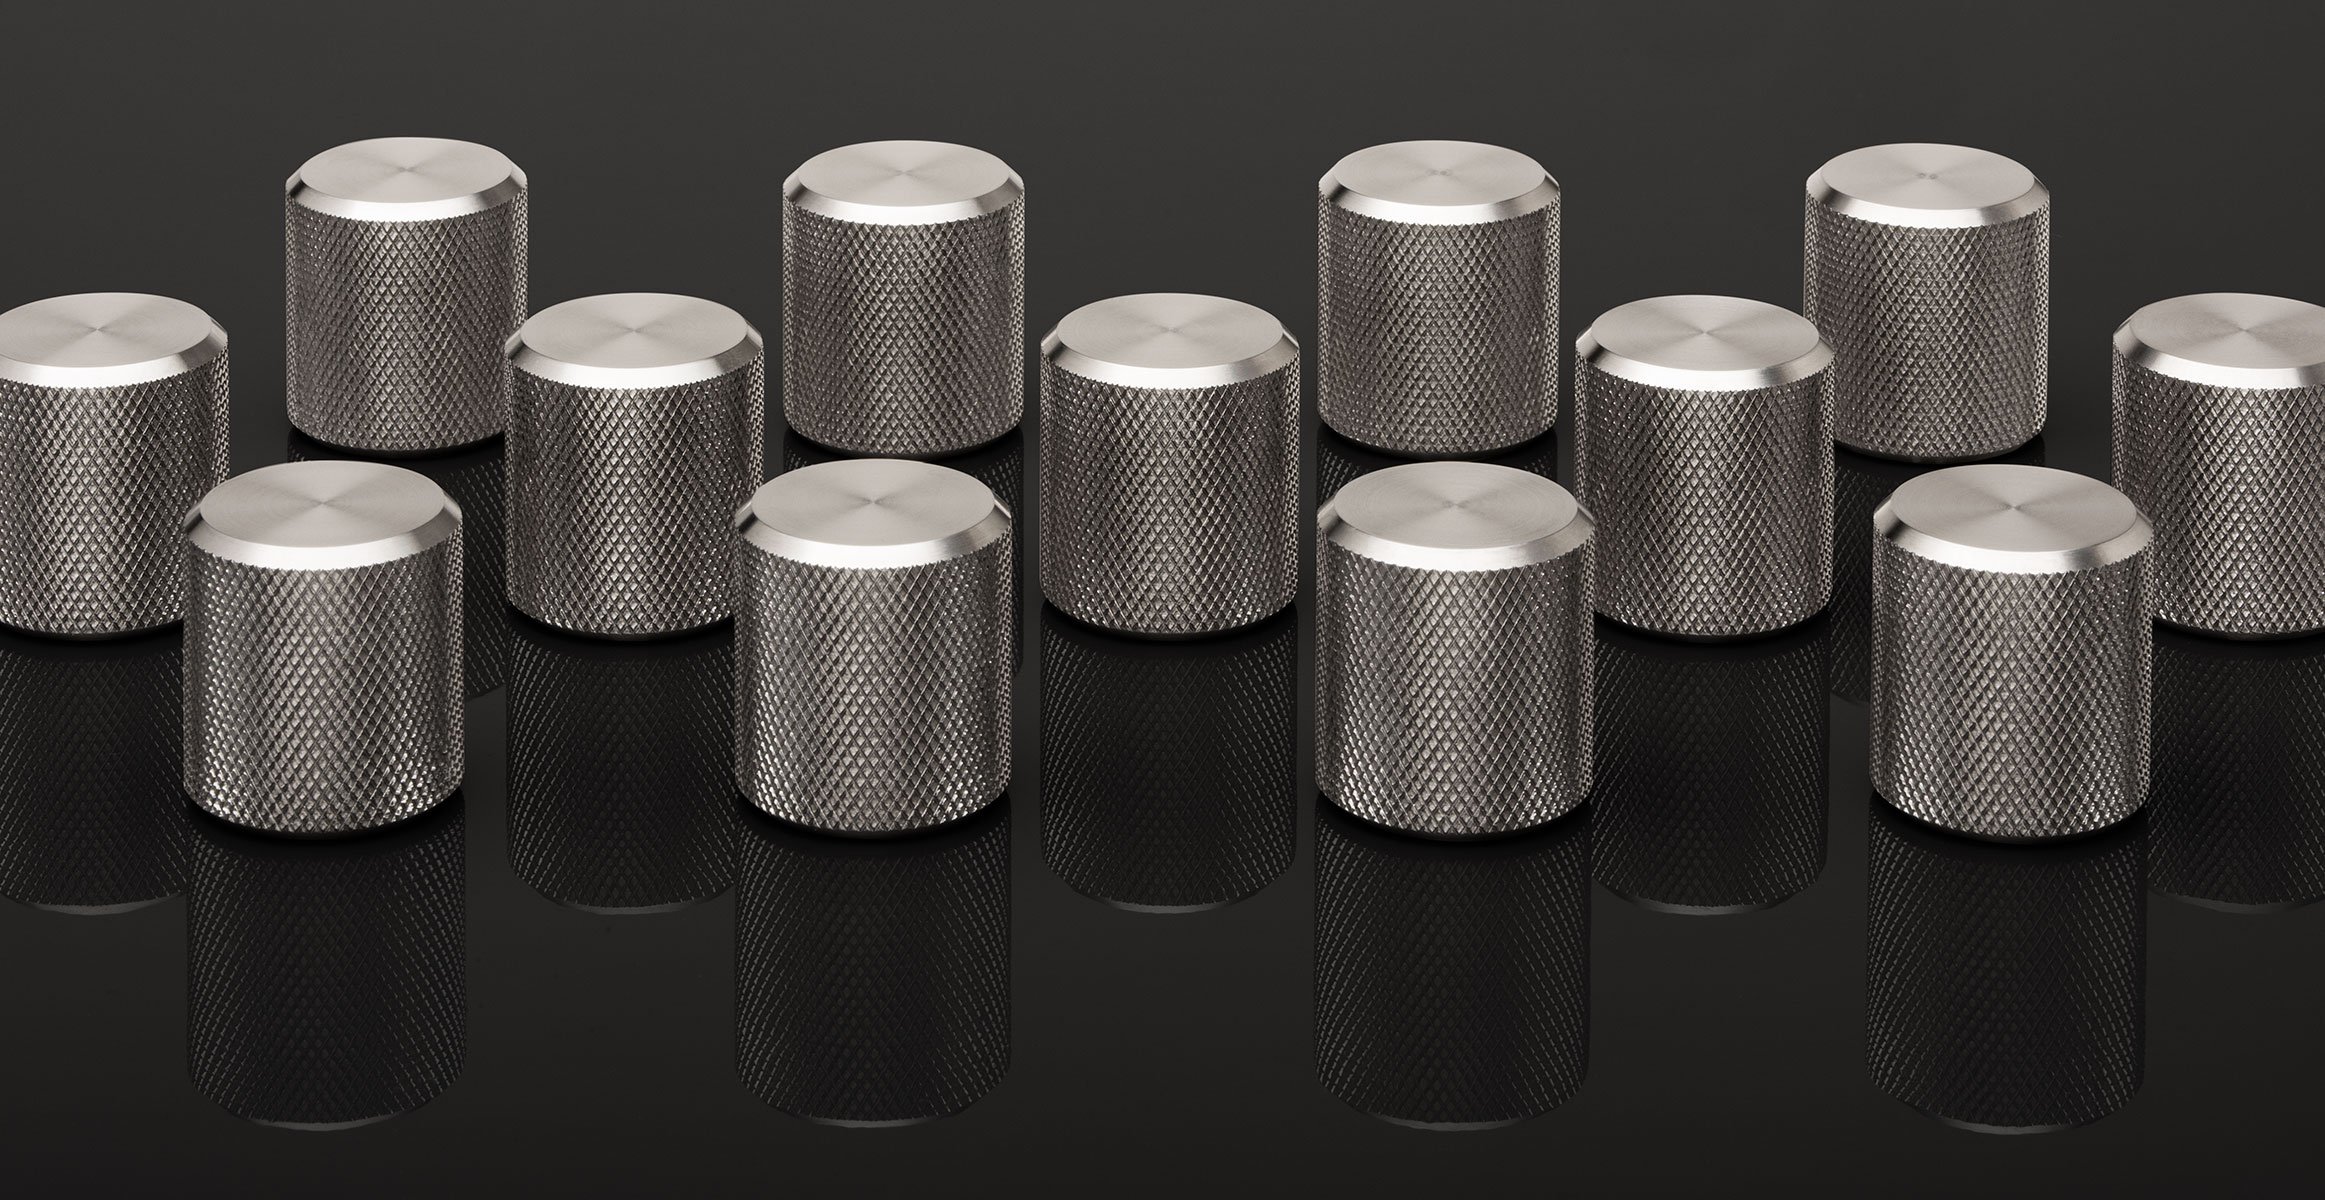 Kor cabinet knobs in stainless with knurled texture